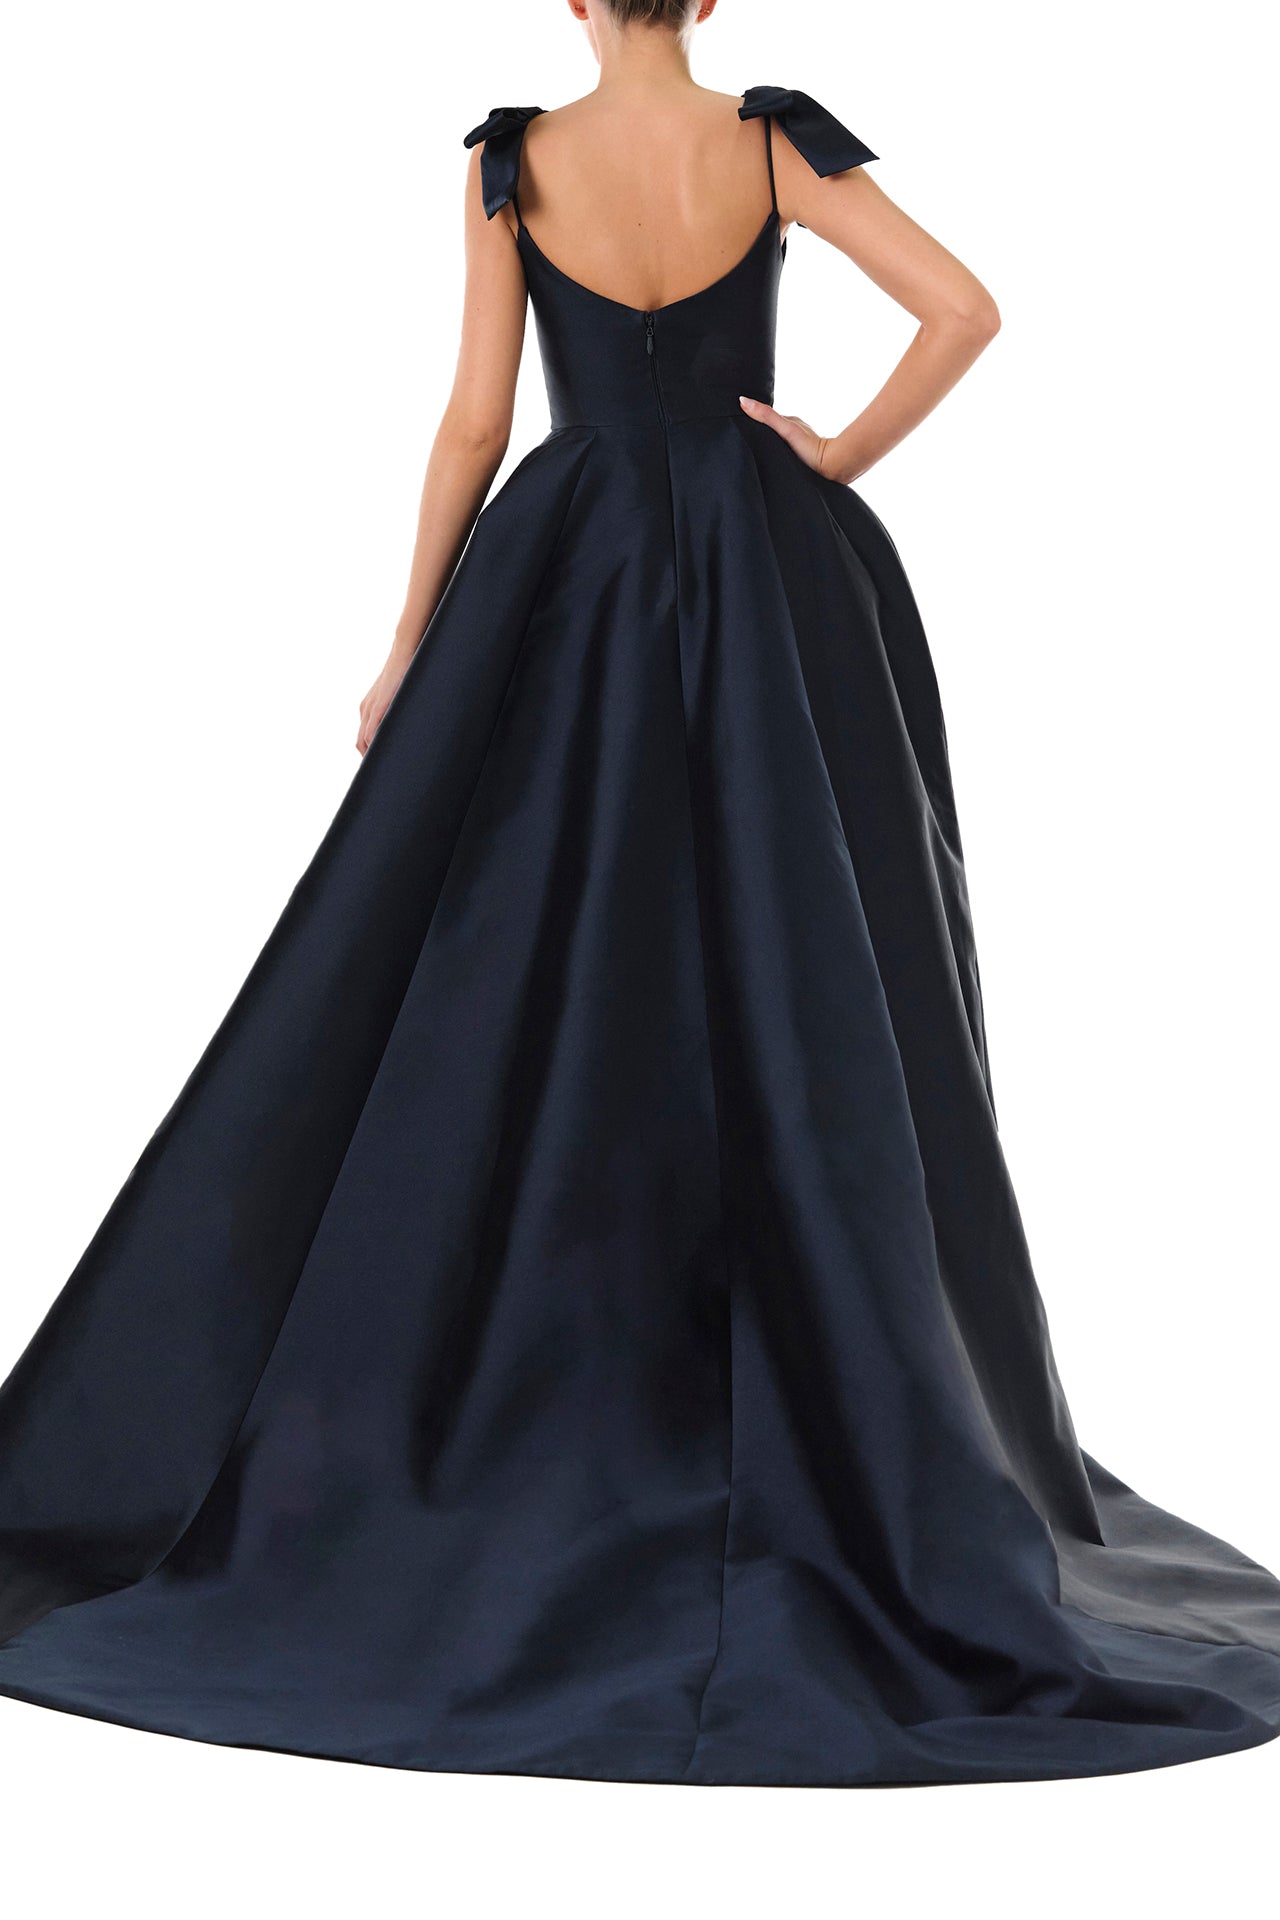 Monique Lhuillier Fall 2024 deep V-neck ball gown in navy mikado with full skirt and bow detail at shoulders - back.